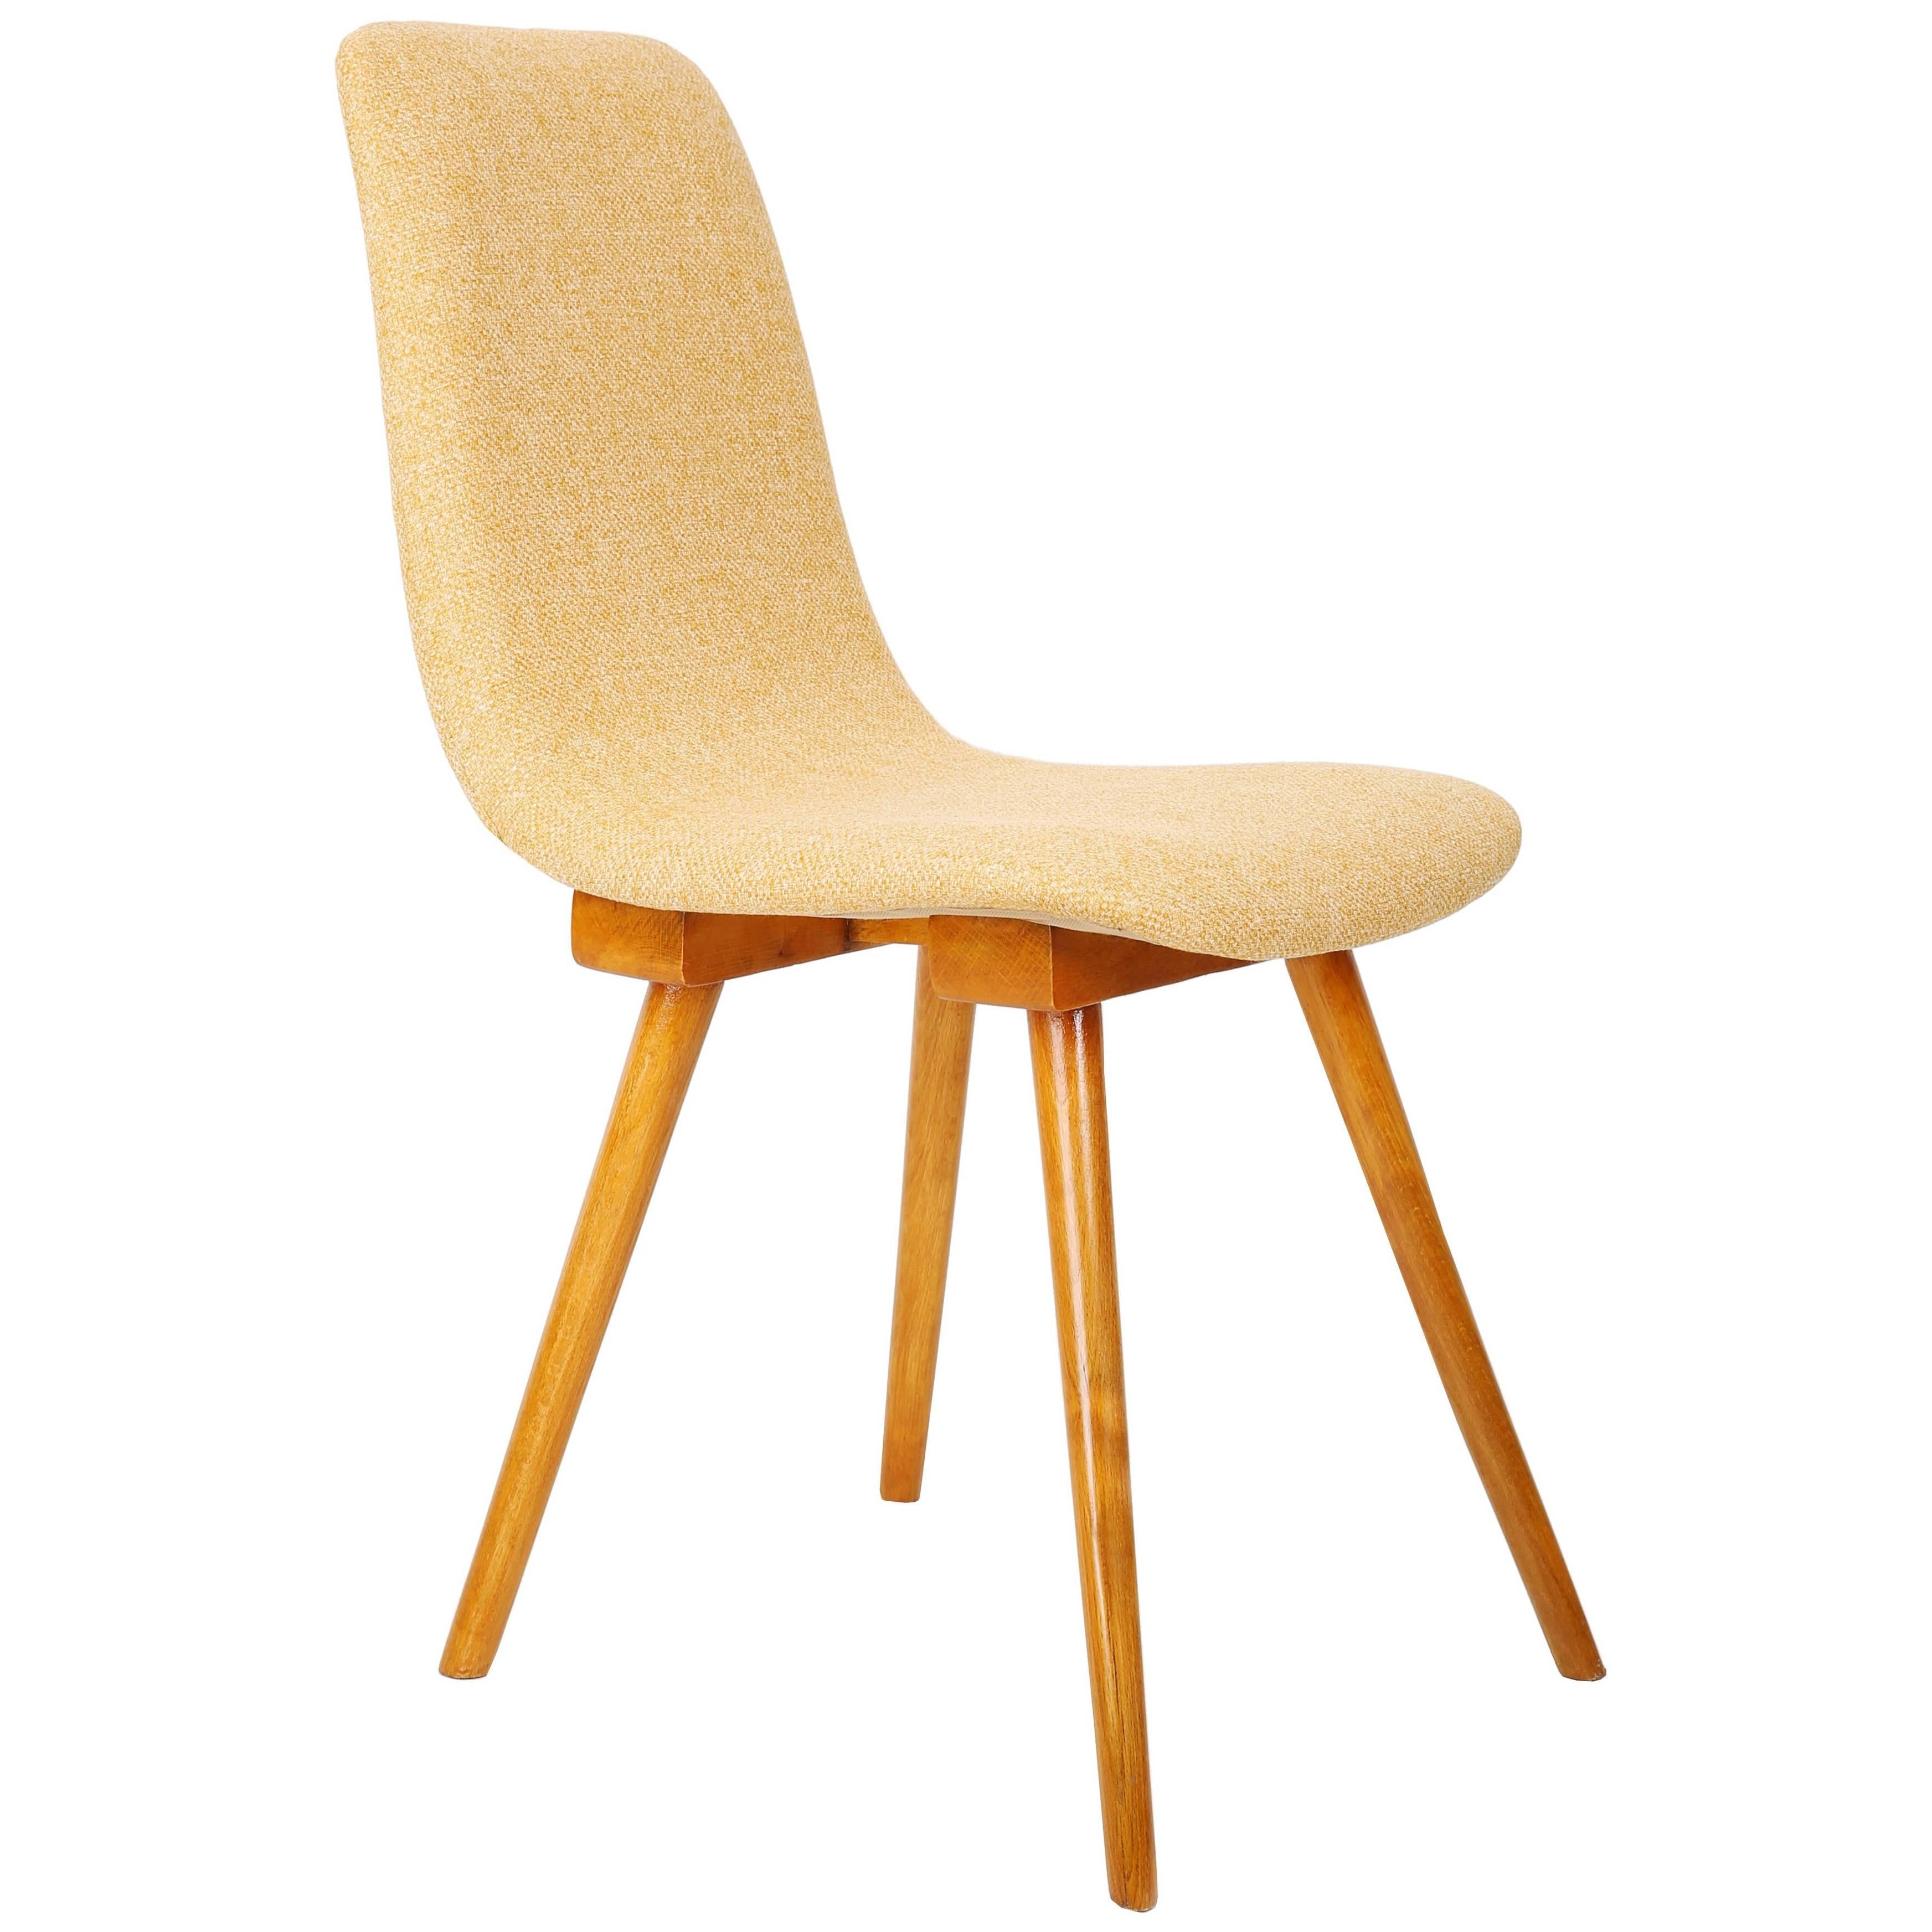 Yellow Mid Century Chair, Fameg Factory, Poland, 1960s. For Sale